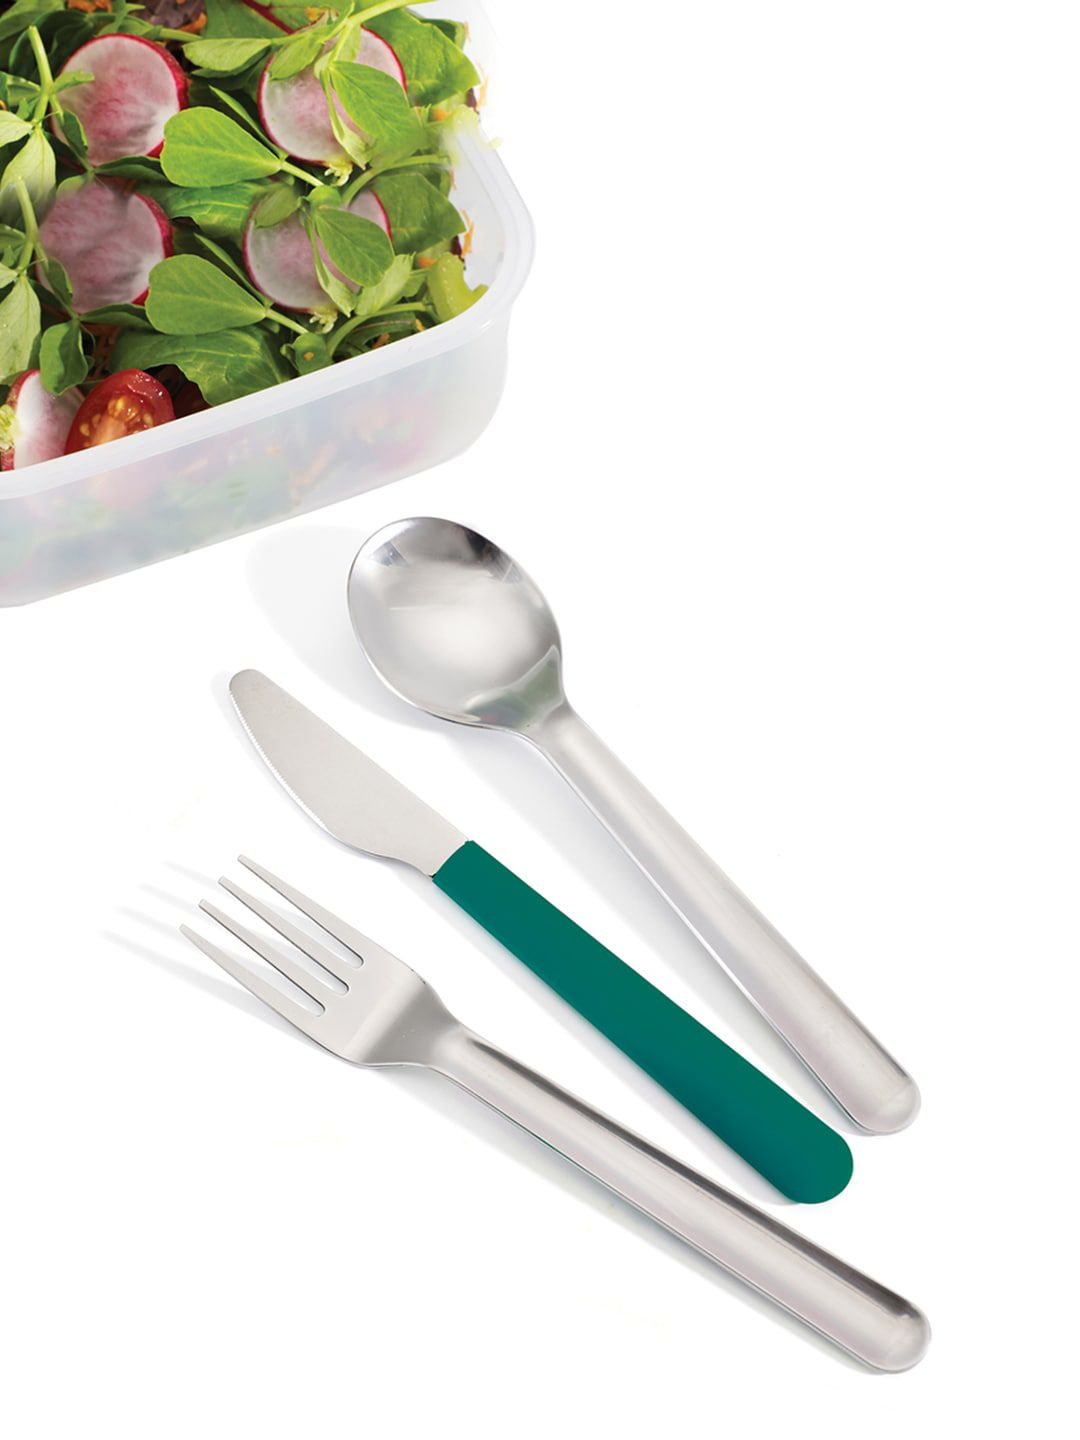 Joseph Joseph Teal & Silver-Toned Solid Go Eat Space Saving Stainless Steel Cutlery Set Price in India